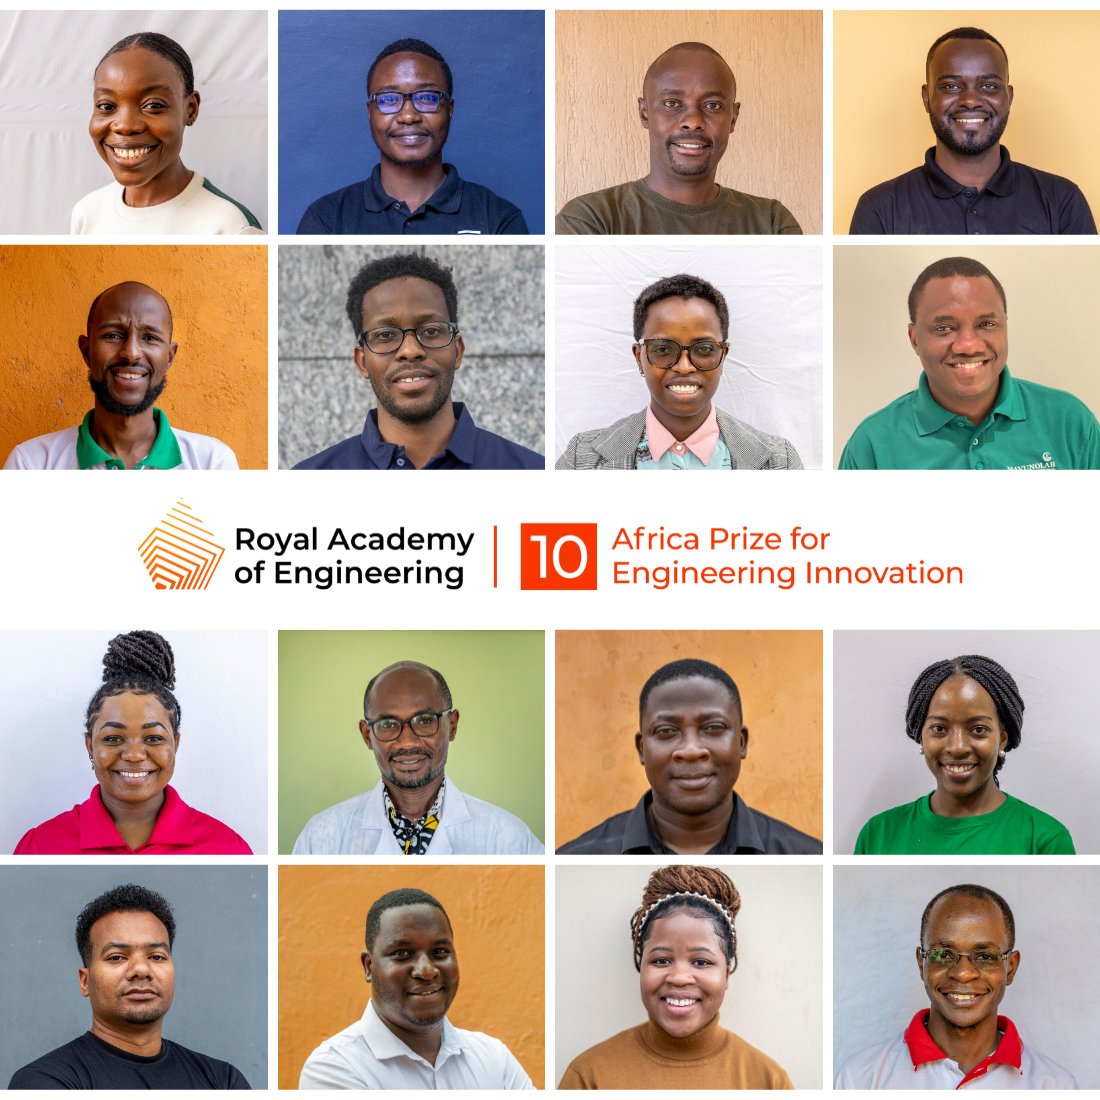 This year's #AfricaPrize Final will be a special one - we're marking a decade accelerating engineering innovation across Africa. We will be celebrating our 10th anniversary and our 10th winner this June. Who will it be? Get to know this year's shortlist: raeng.org.uk/news/16-innova…